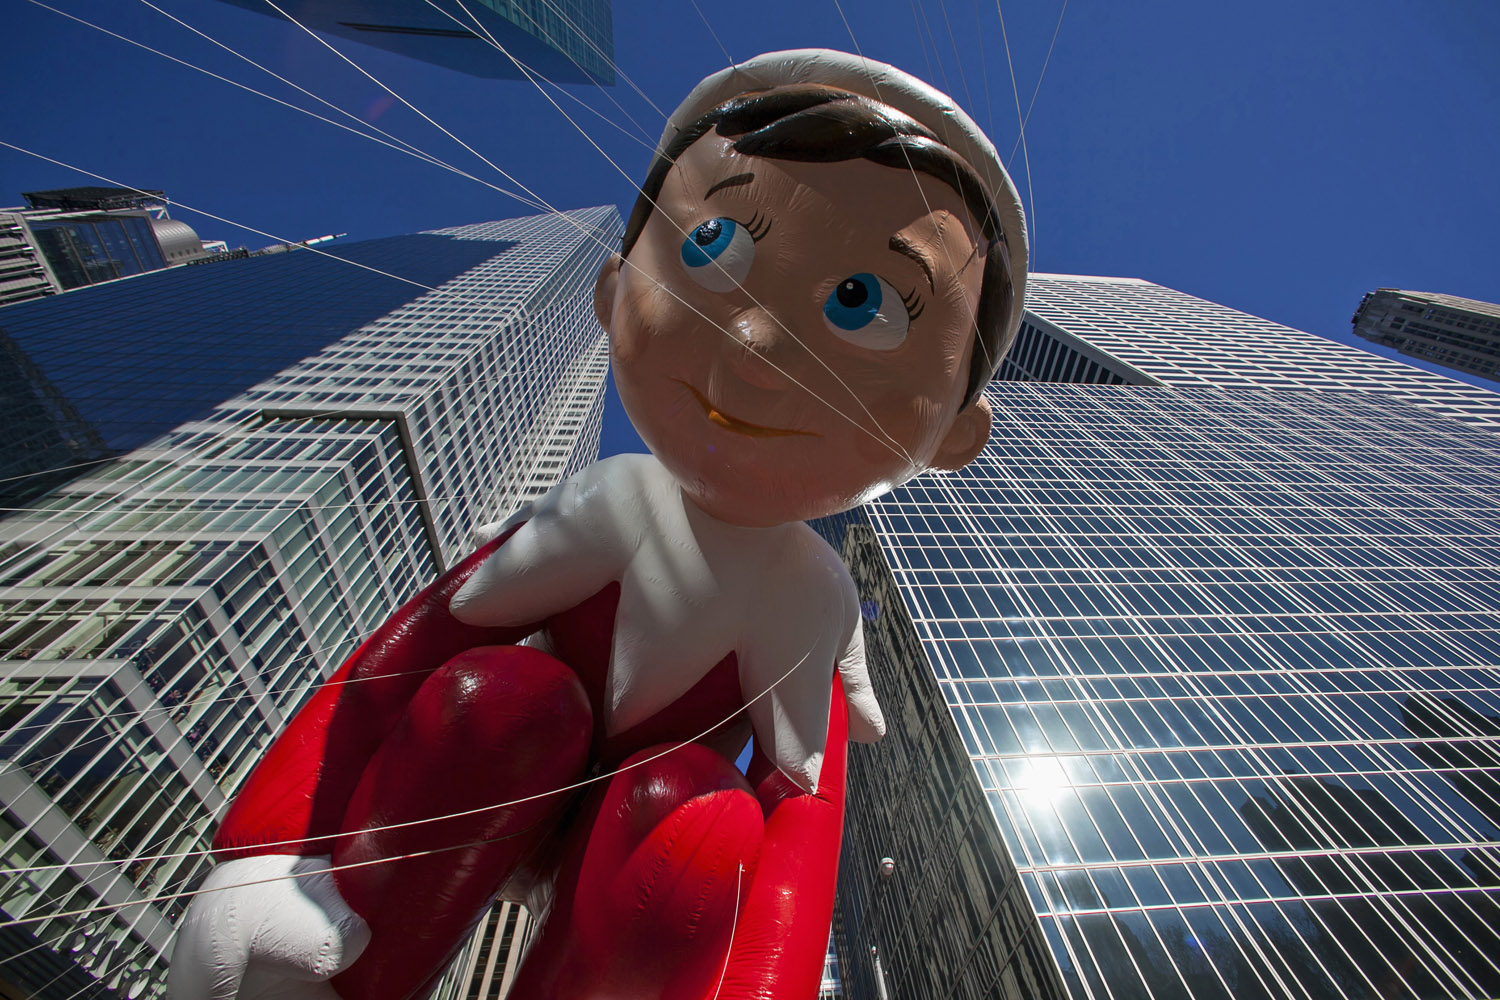 Nov. 28, 2013. The Elf on the Shelf balloon floats down Sixth Avenue during the 87th Macy's Thanksgiving Day Parade in New York.